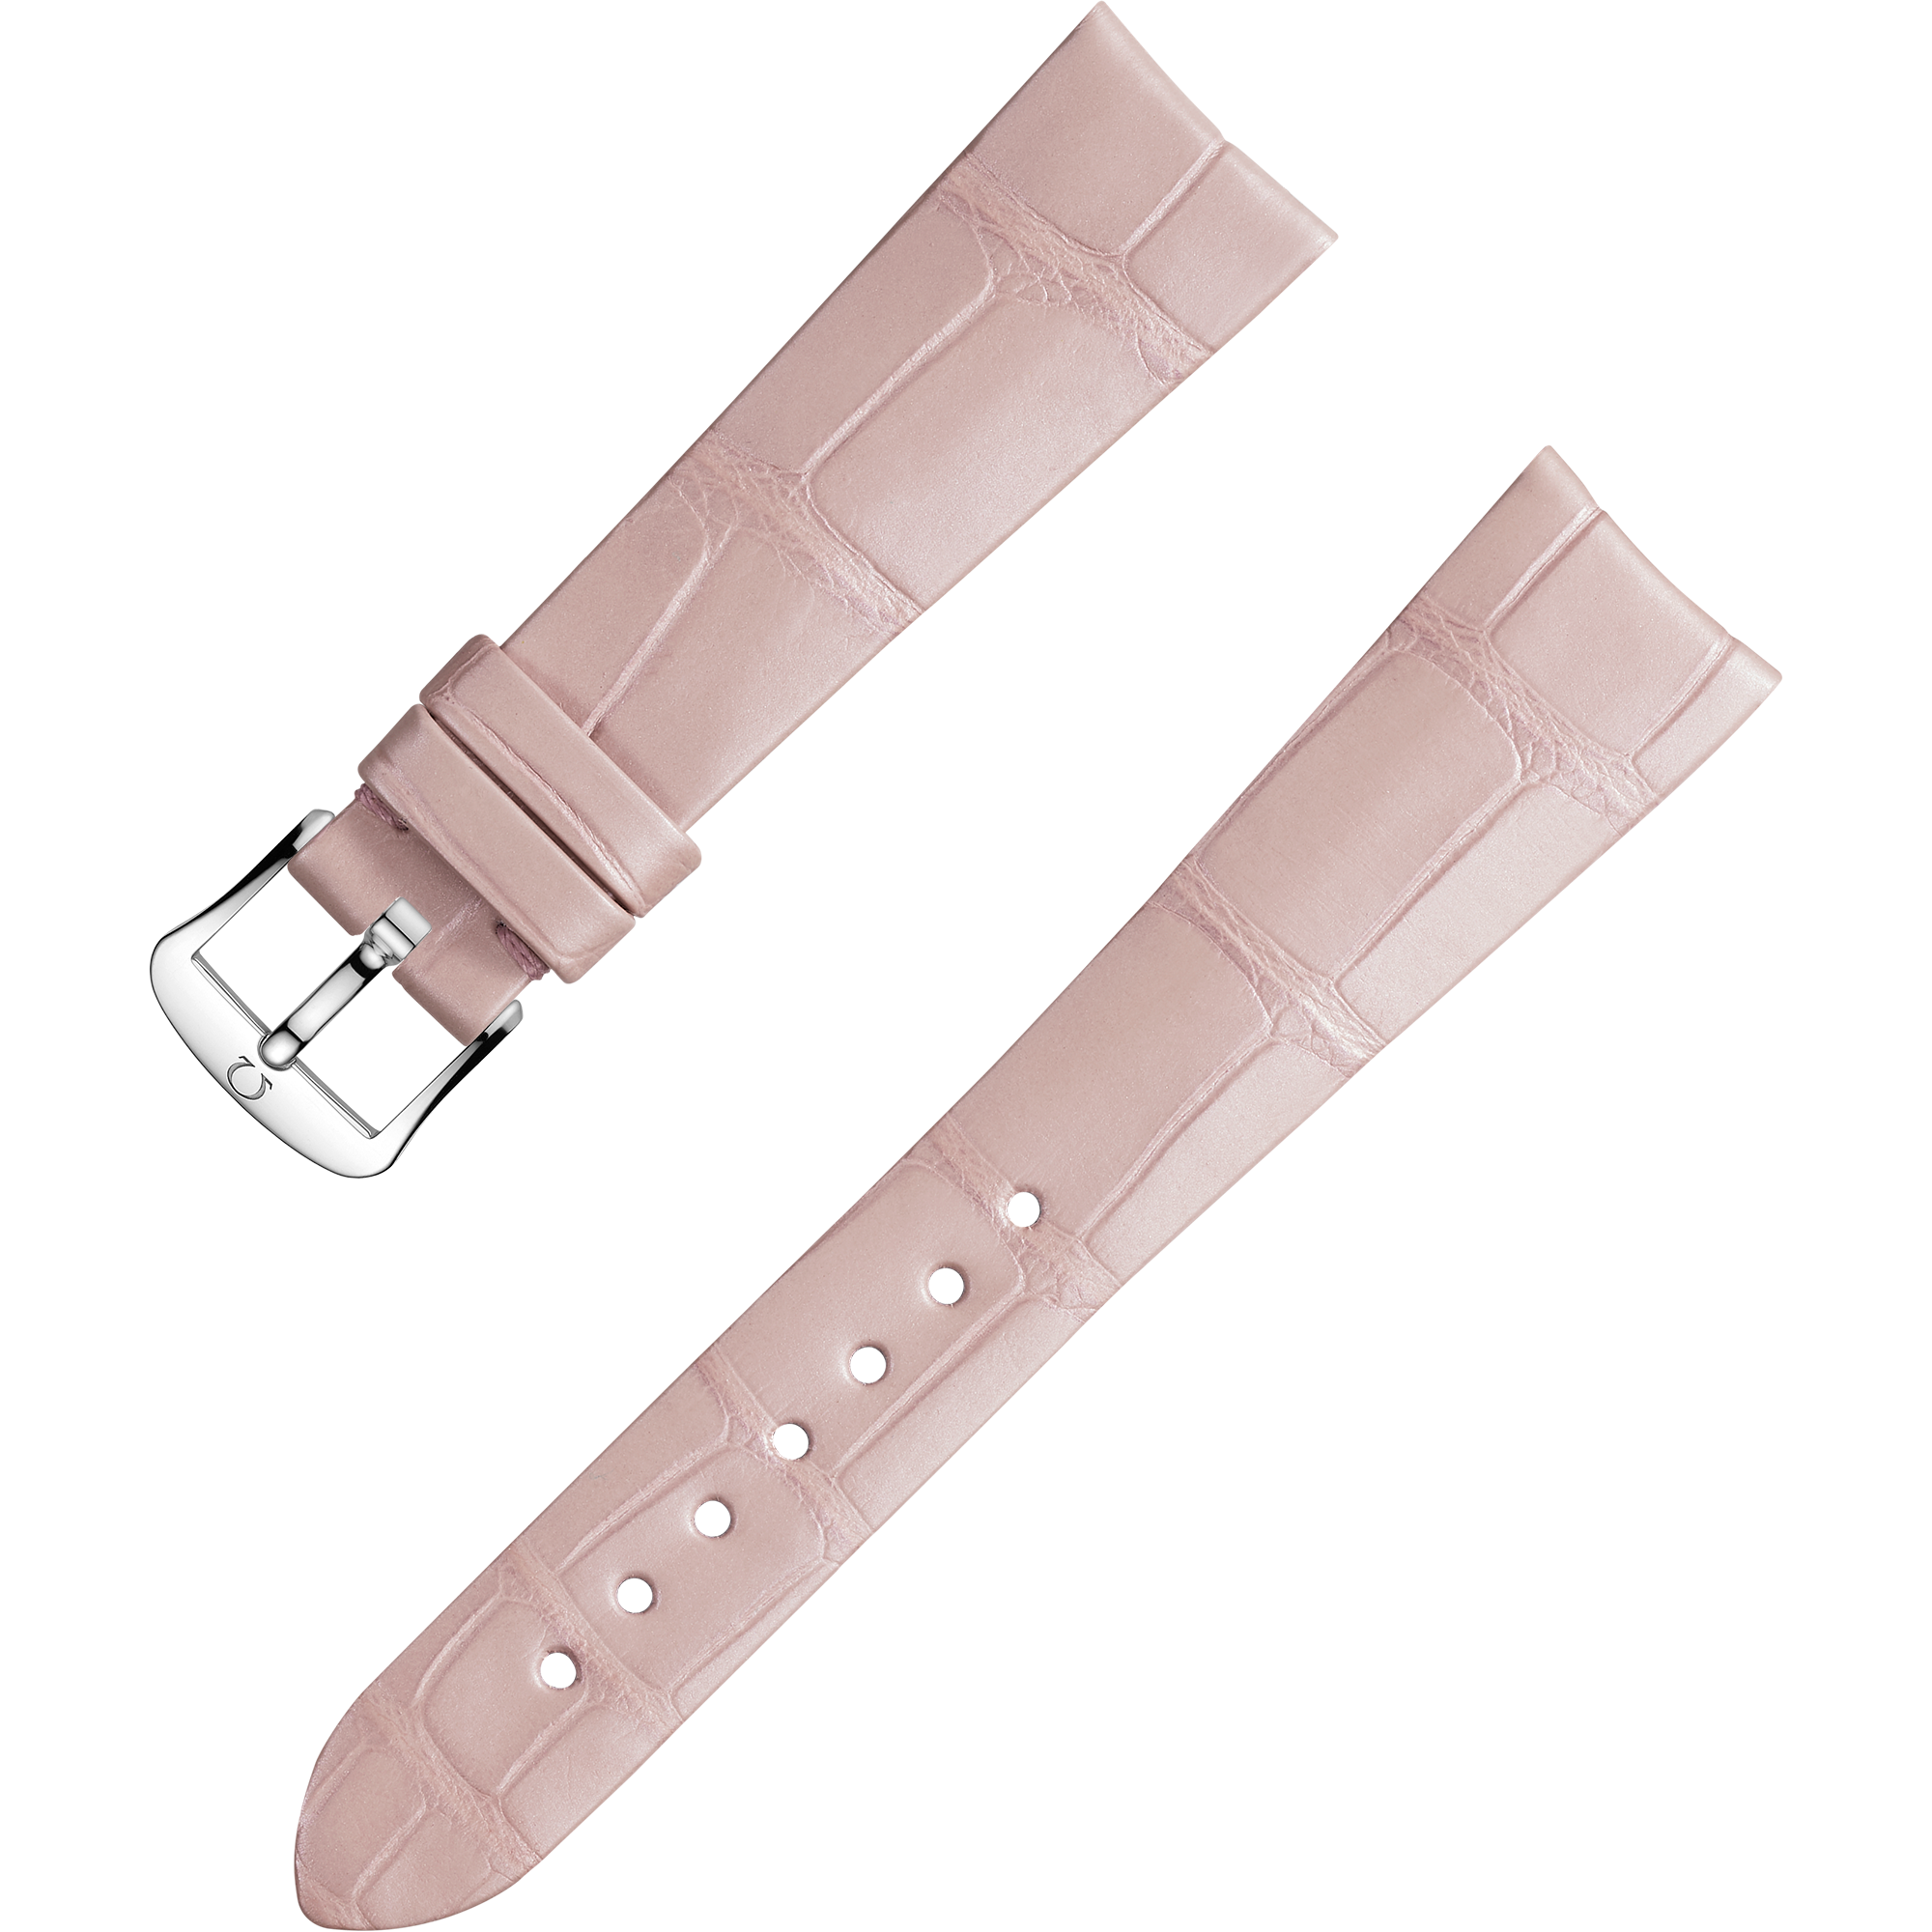 Two-piece strap - Light pink alligator leather strap with pin buckle - 032CUZ011092W